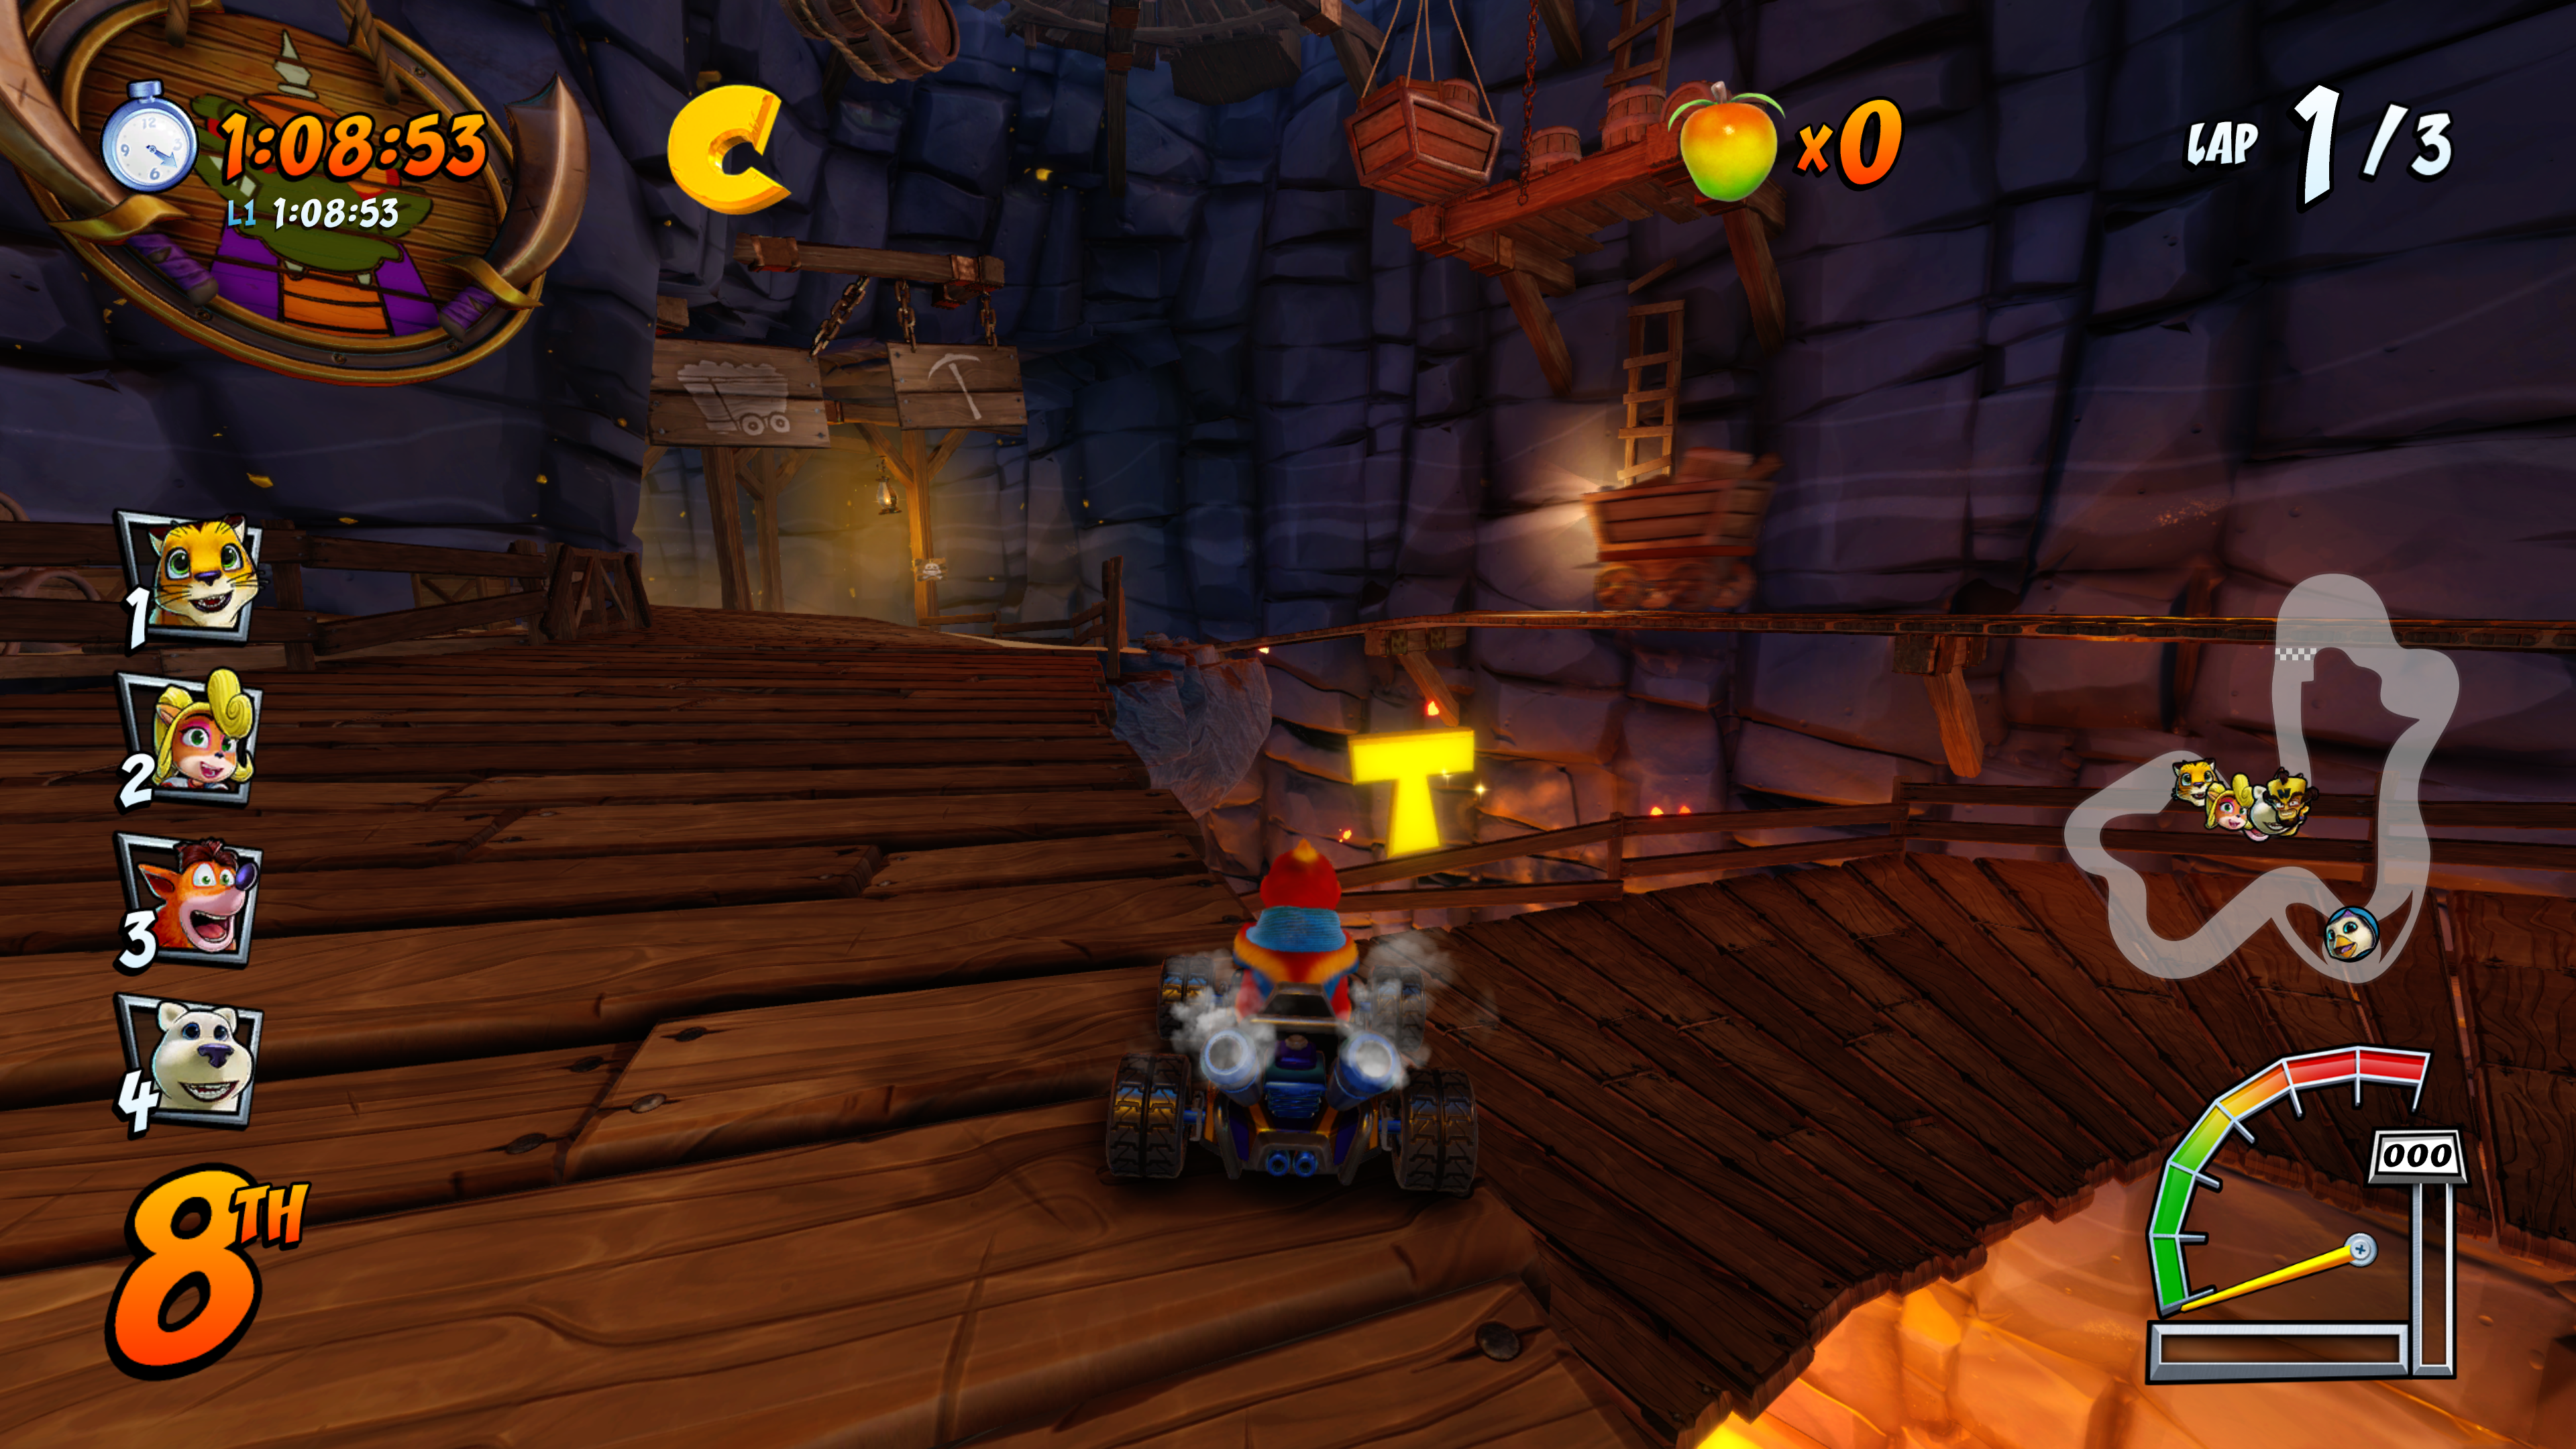 Guide for Crash Team Racing Nitro-Fueled - CTR Challenges